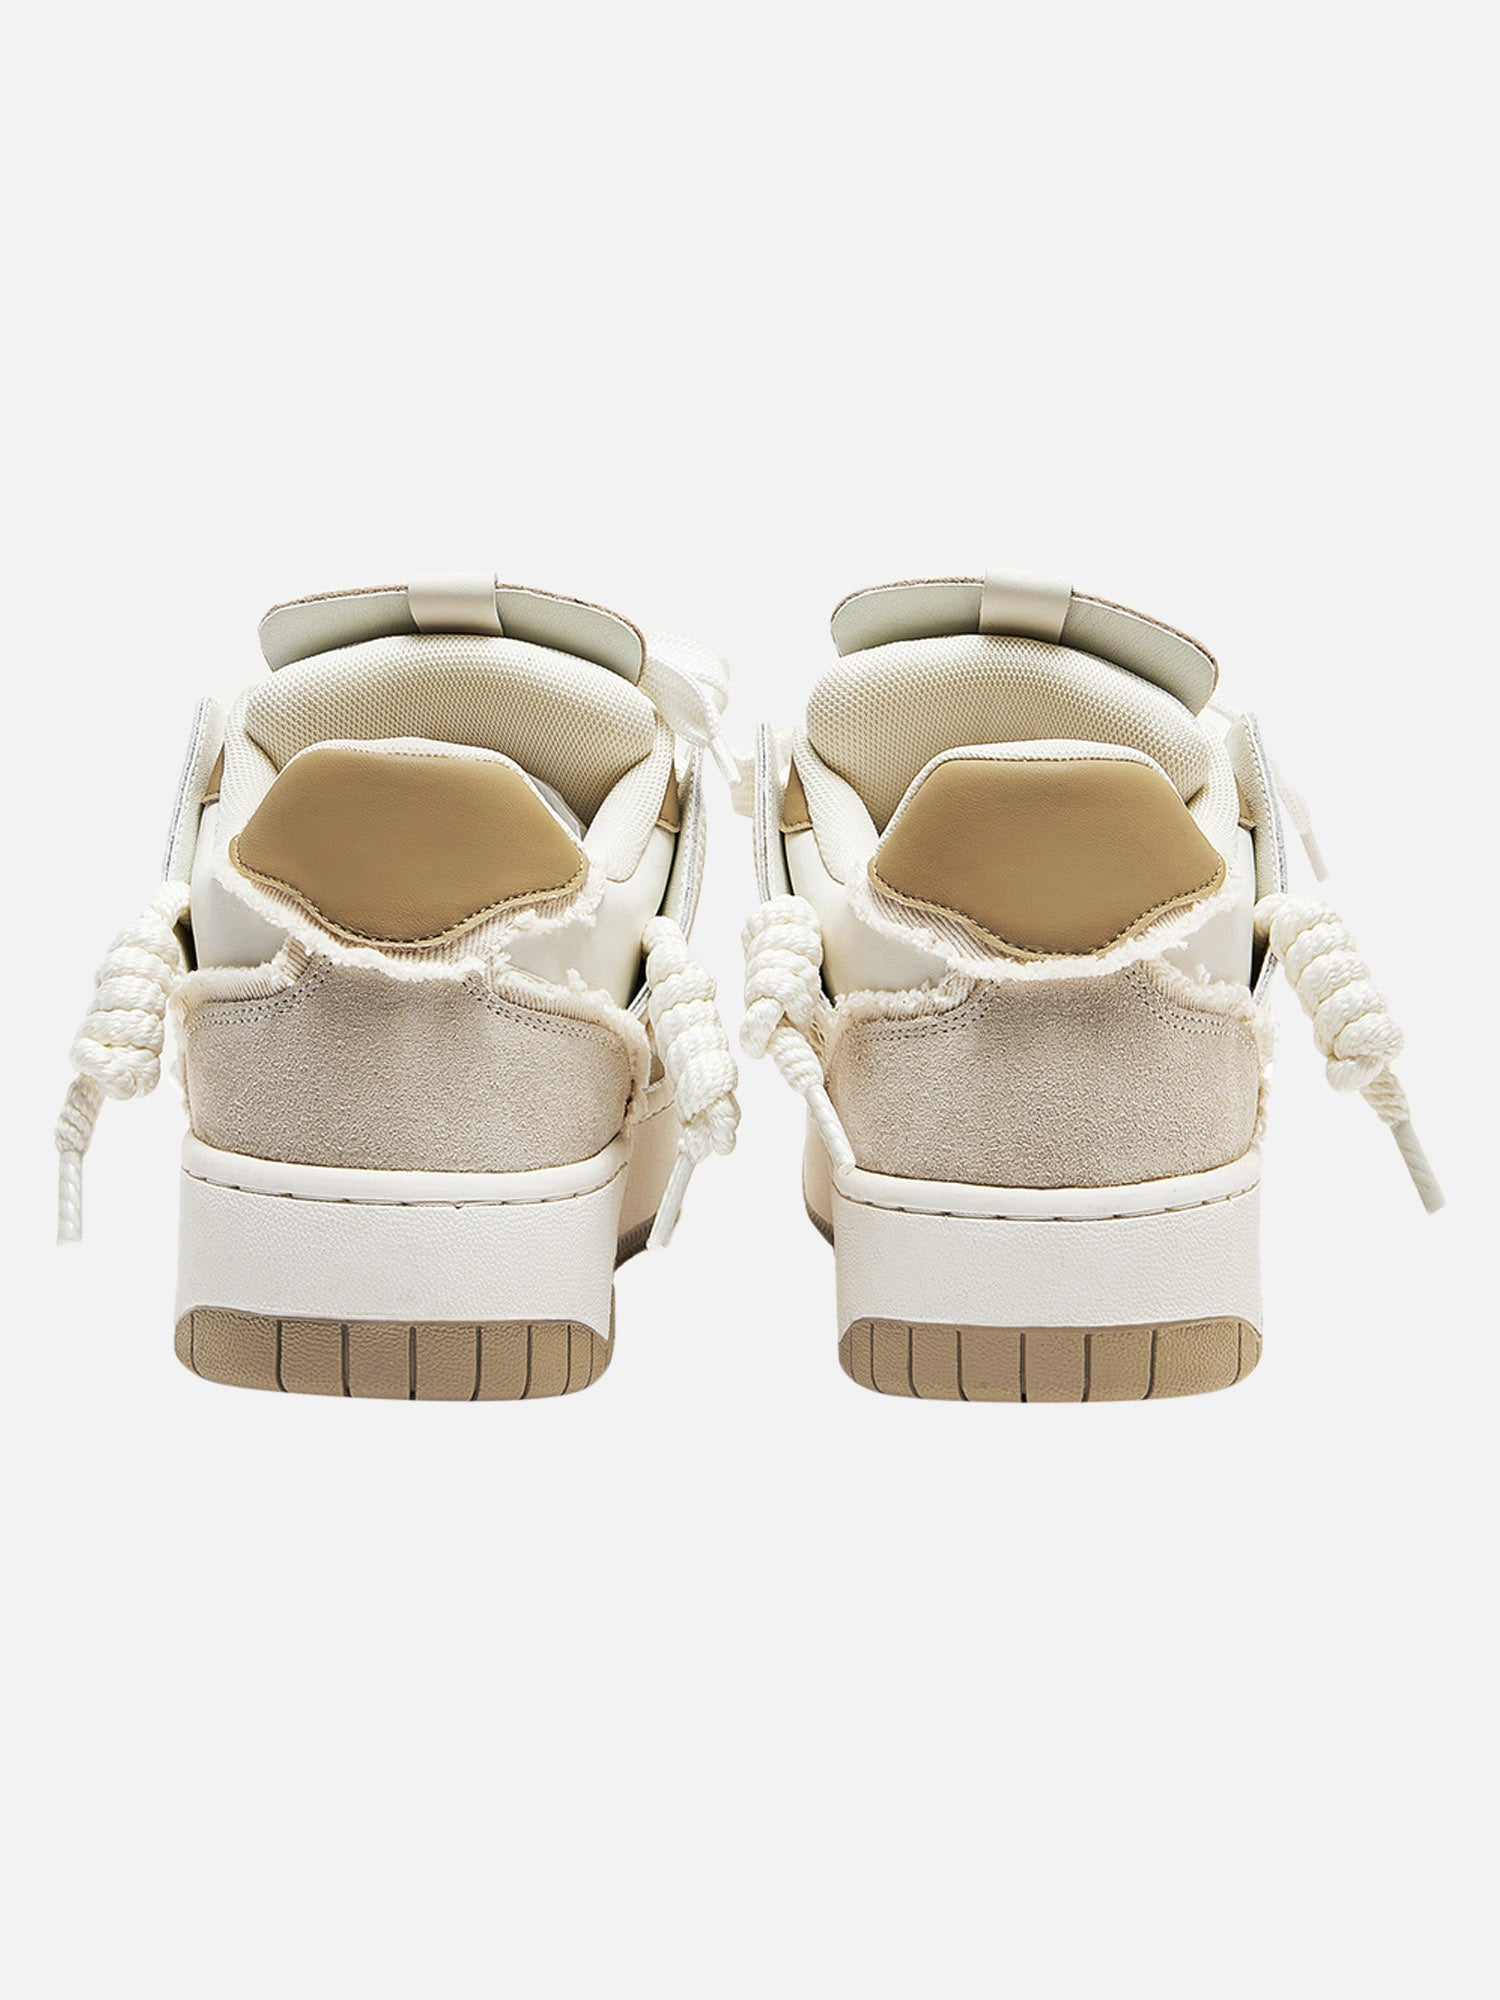 Thesupermade Destruction Series Tassel Contrast Color Sneakers